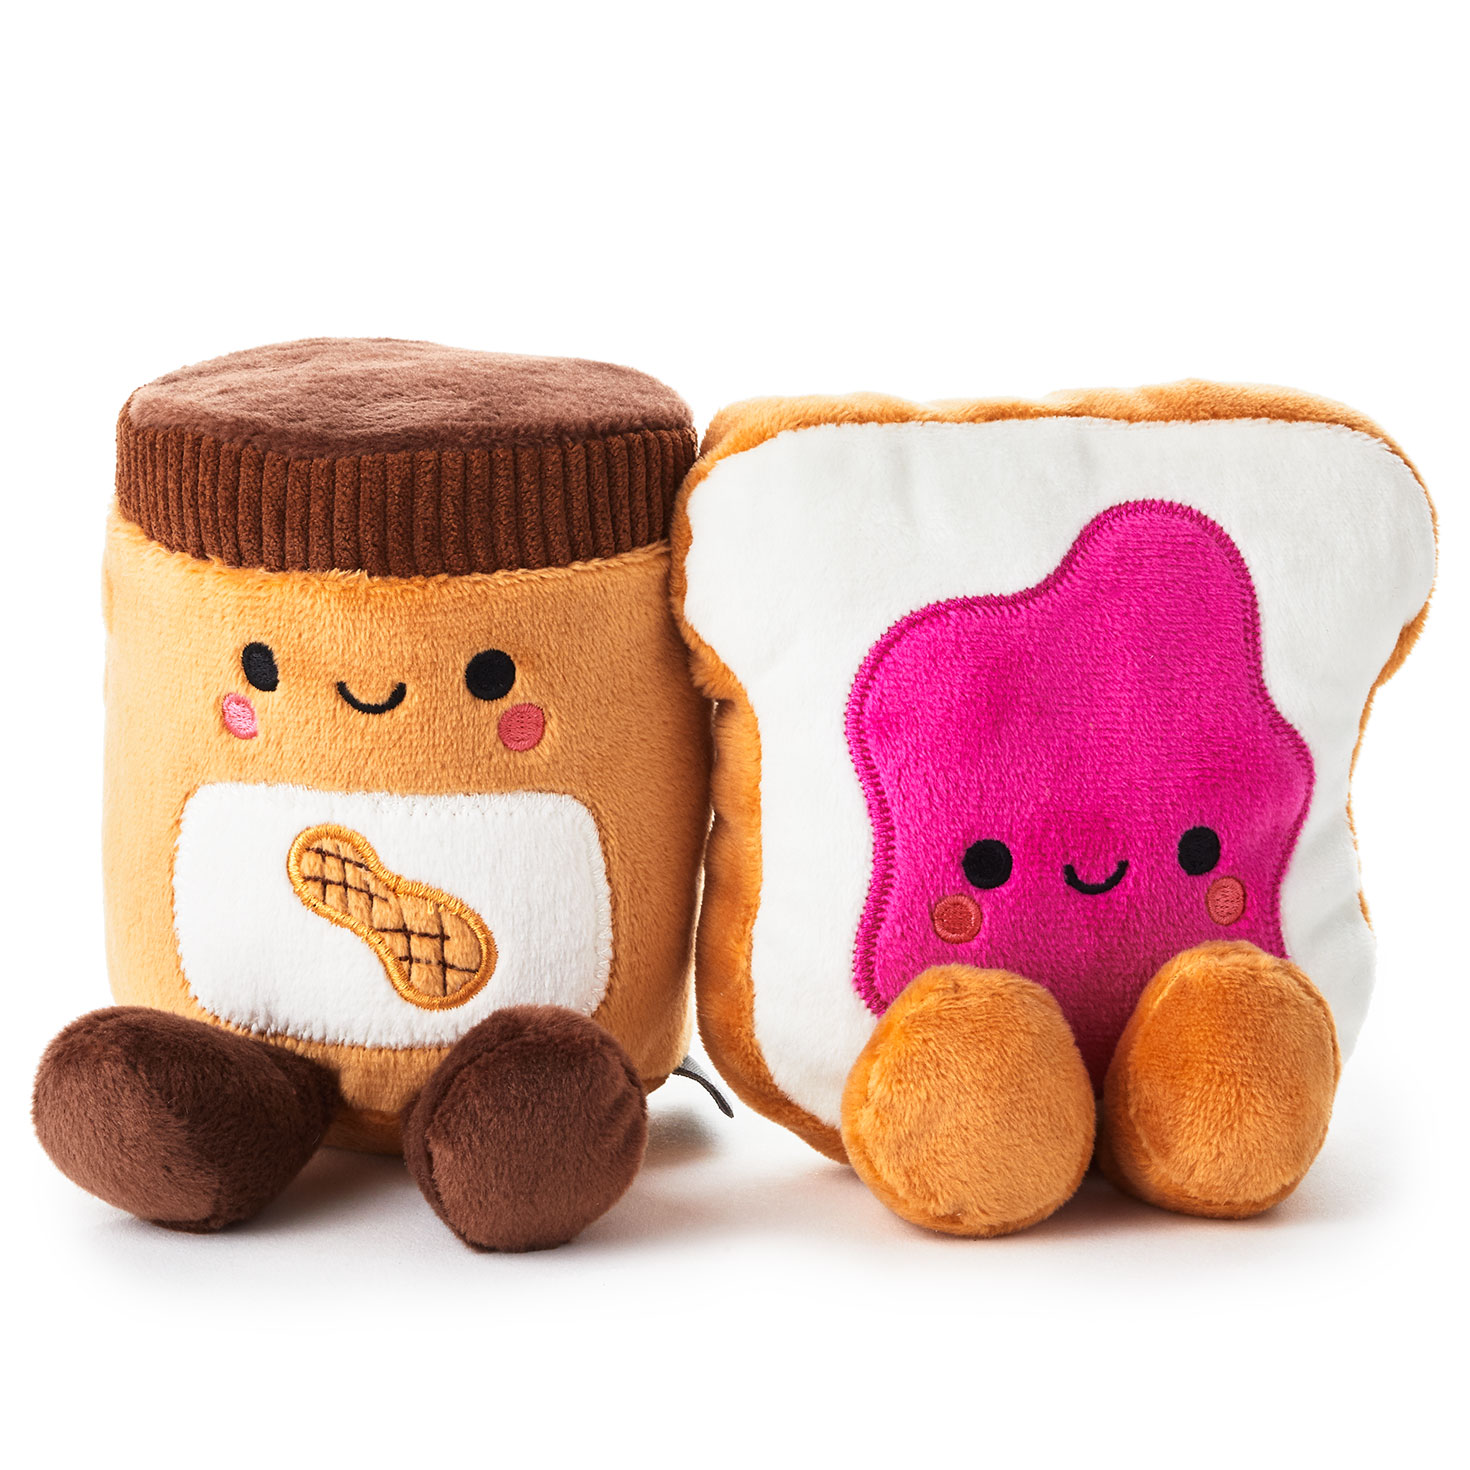 Better Together Peanut Butter and Jelly Magnetic Plush, 5" for only USD 16.99 | Hallmark